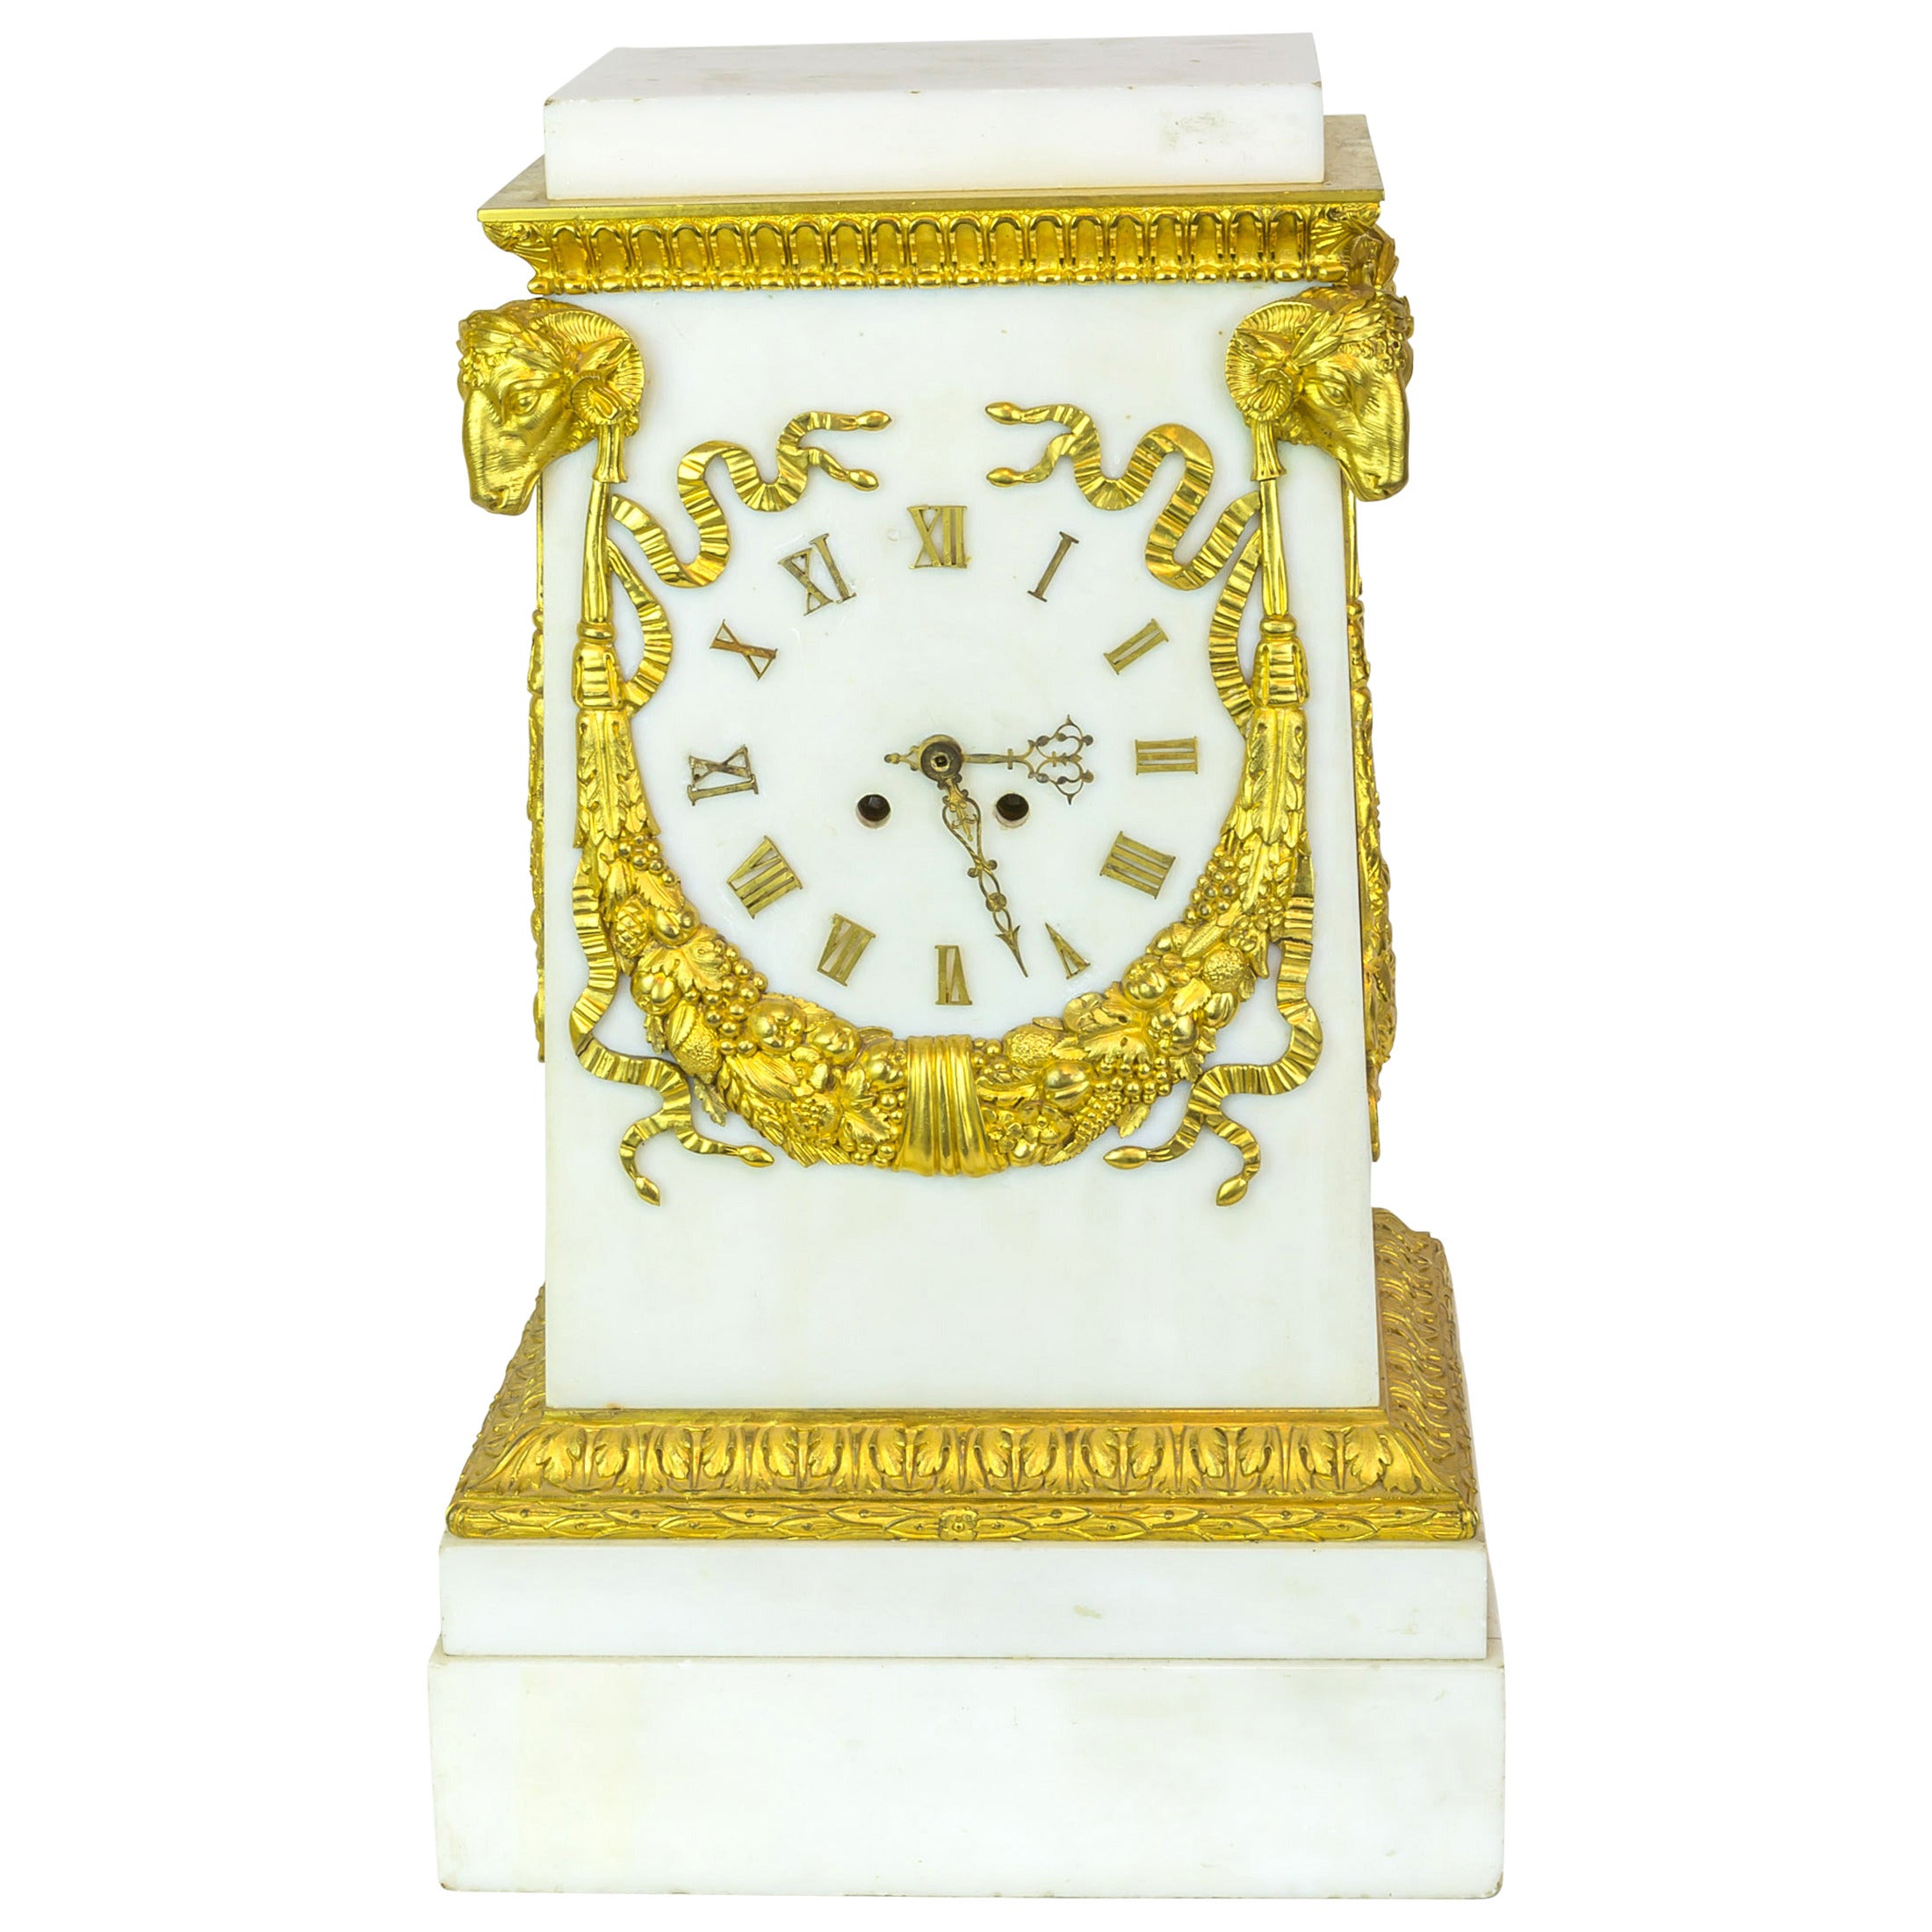 White Marble and Bronze Neoclassical Mantel Clock with Ram's Head